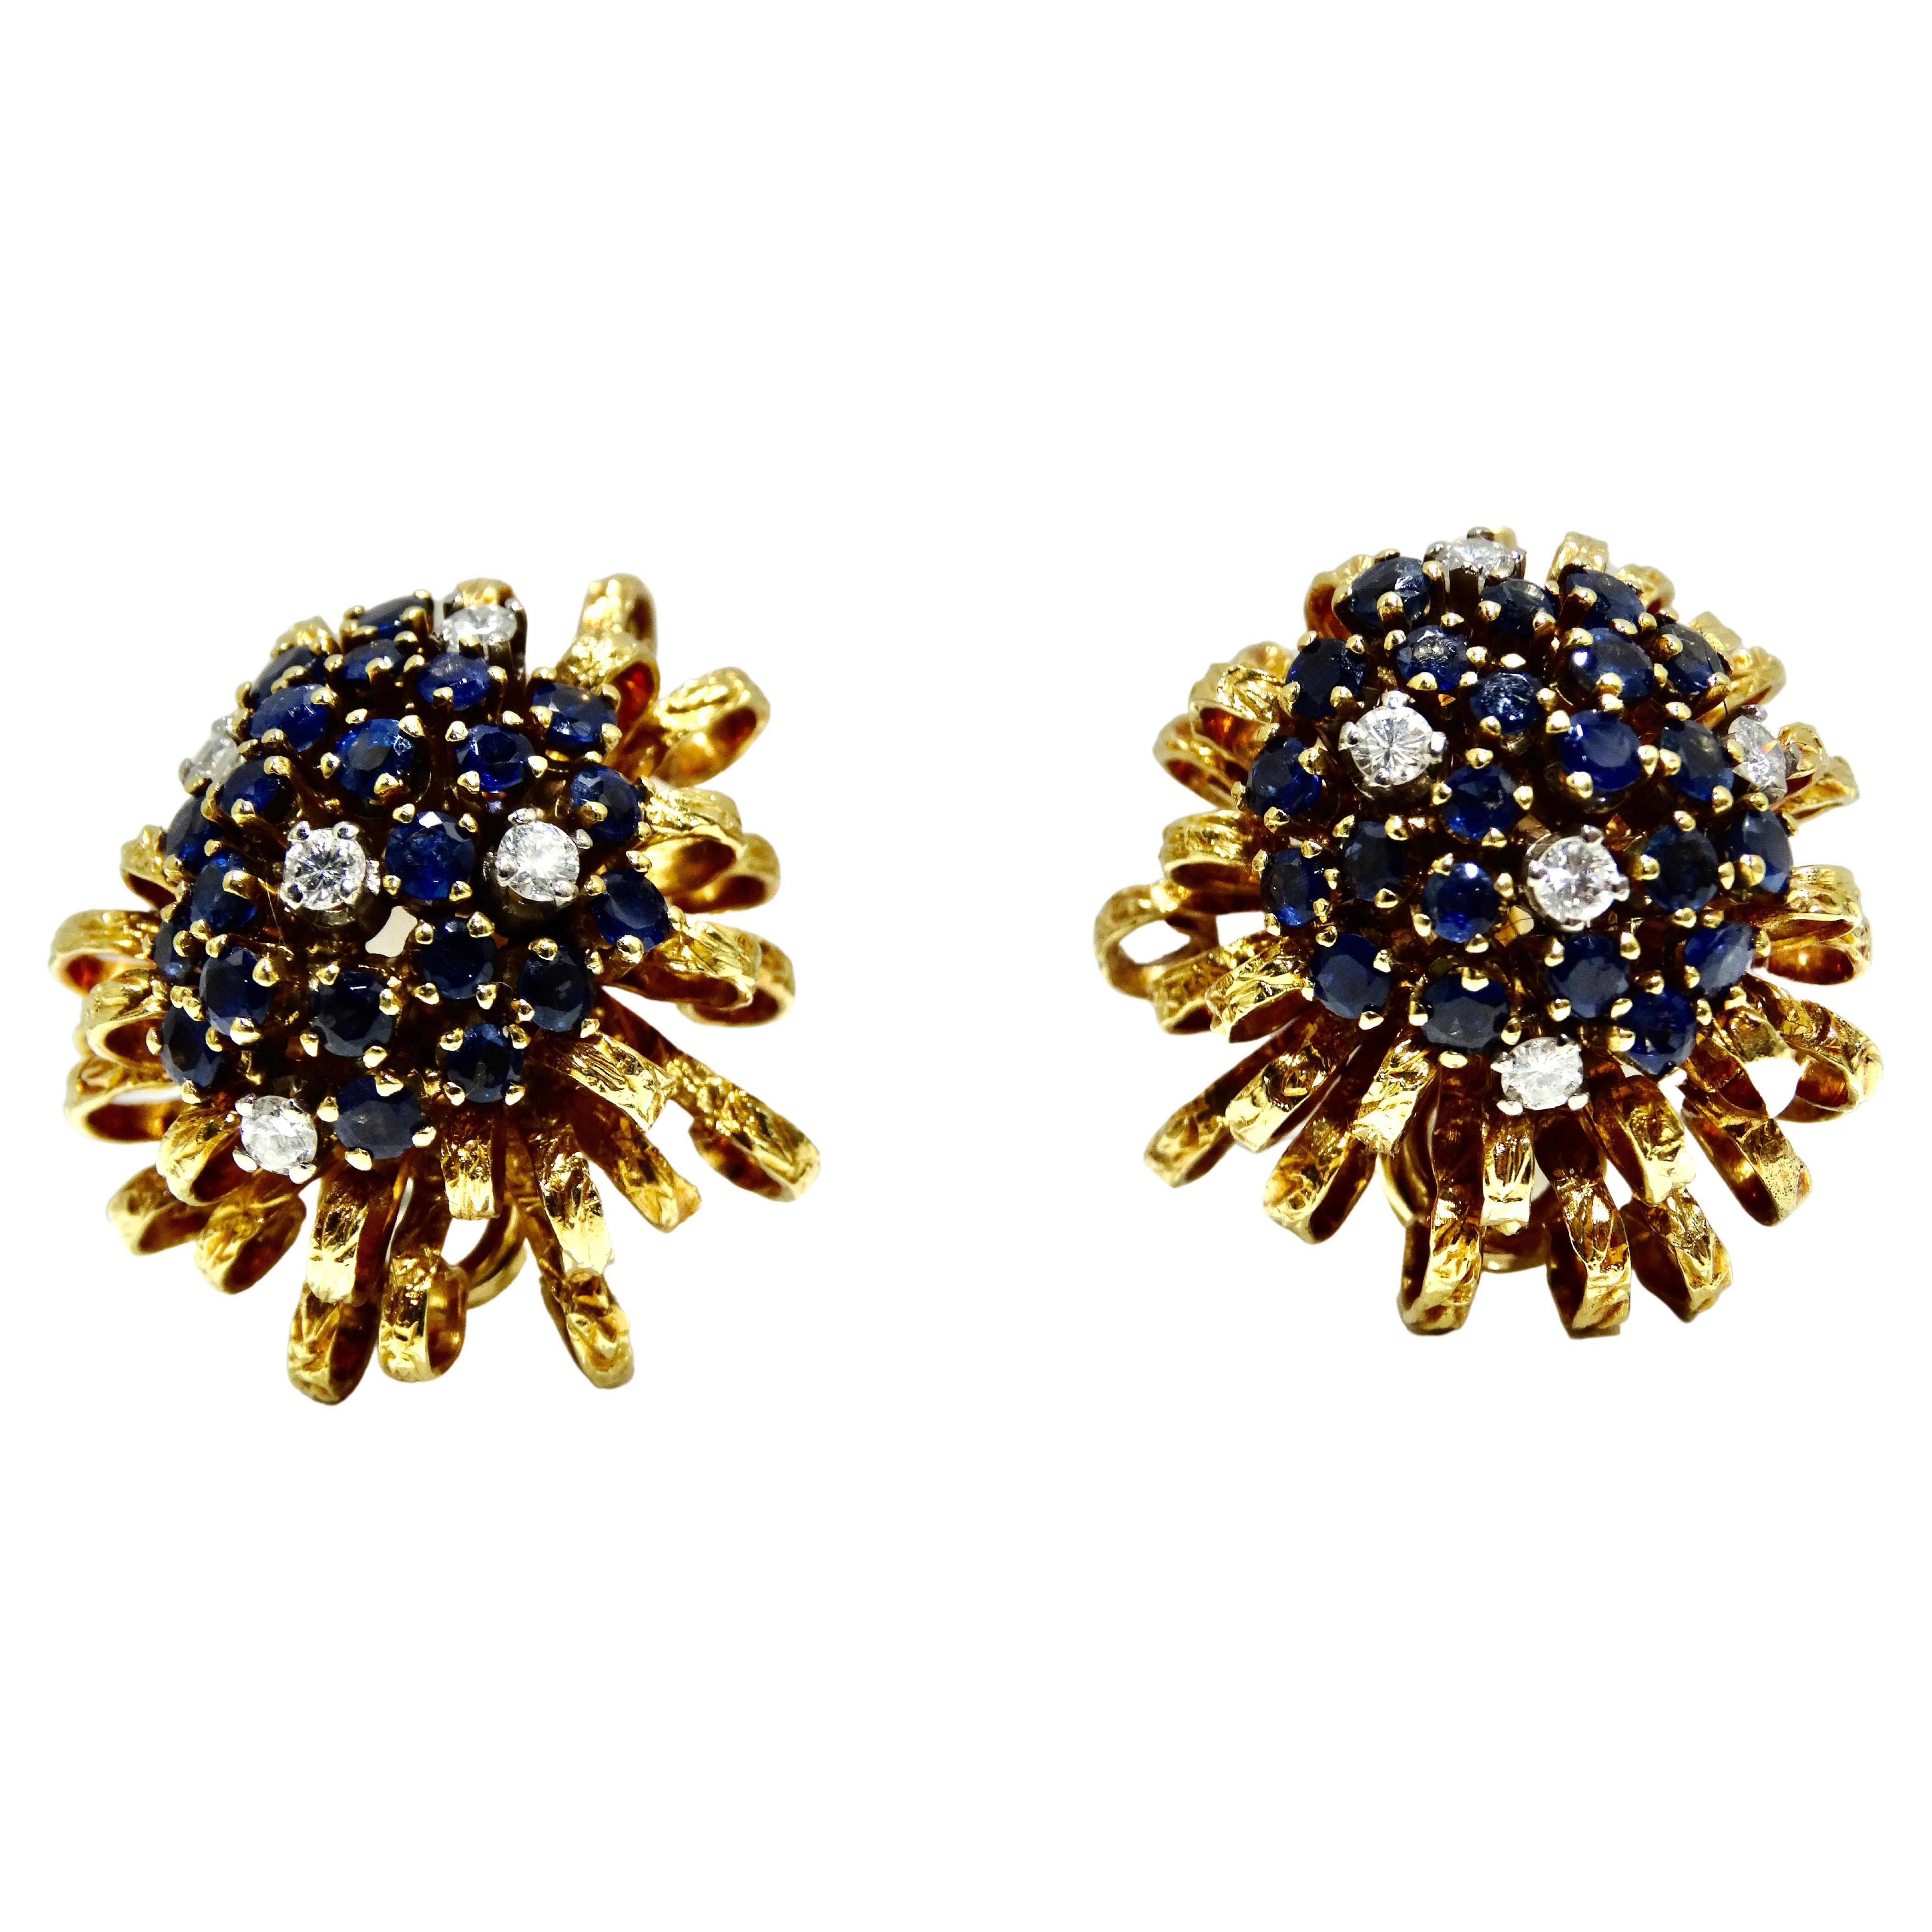 Impressive ribbon wedged heirloom 18k gold clip-ons featuring a sparkling cluster of Montana sapphires enhanced by several diamonds. Additional ribbon wedges of textured gold form the lower layer of these free flowing festive jeweled earrings.
Each